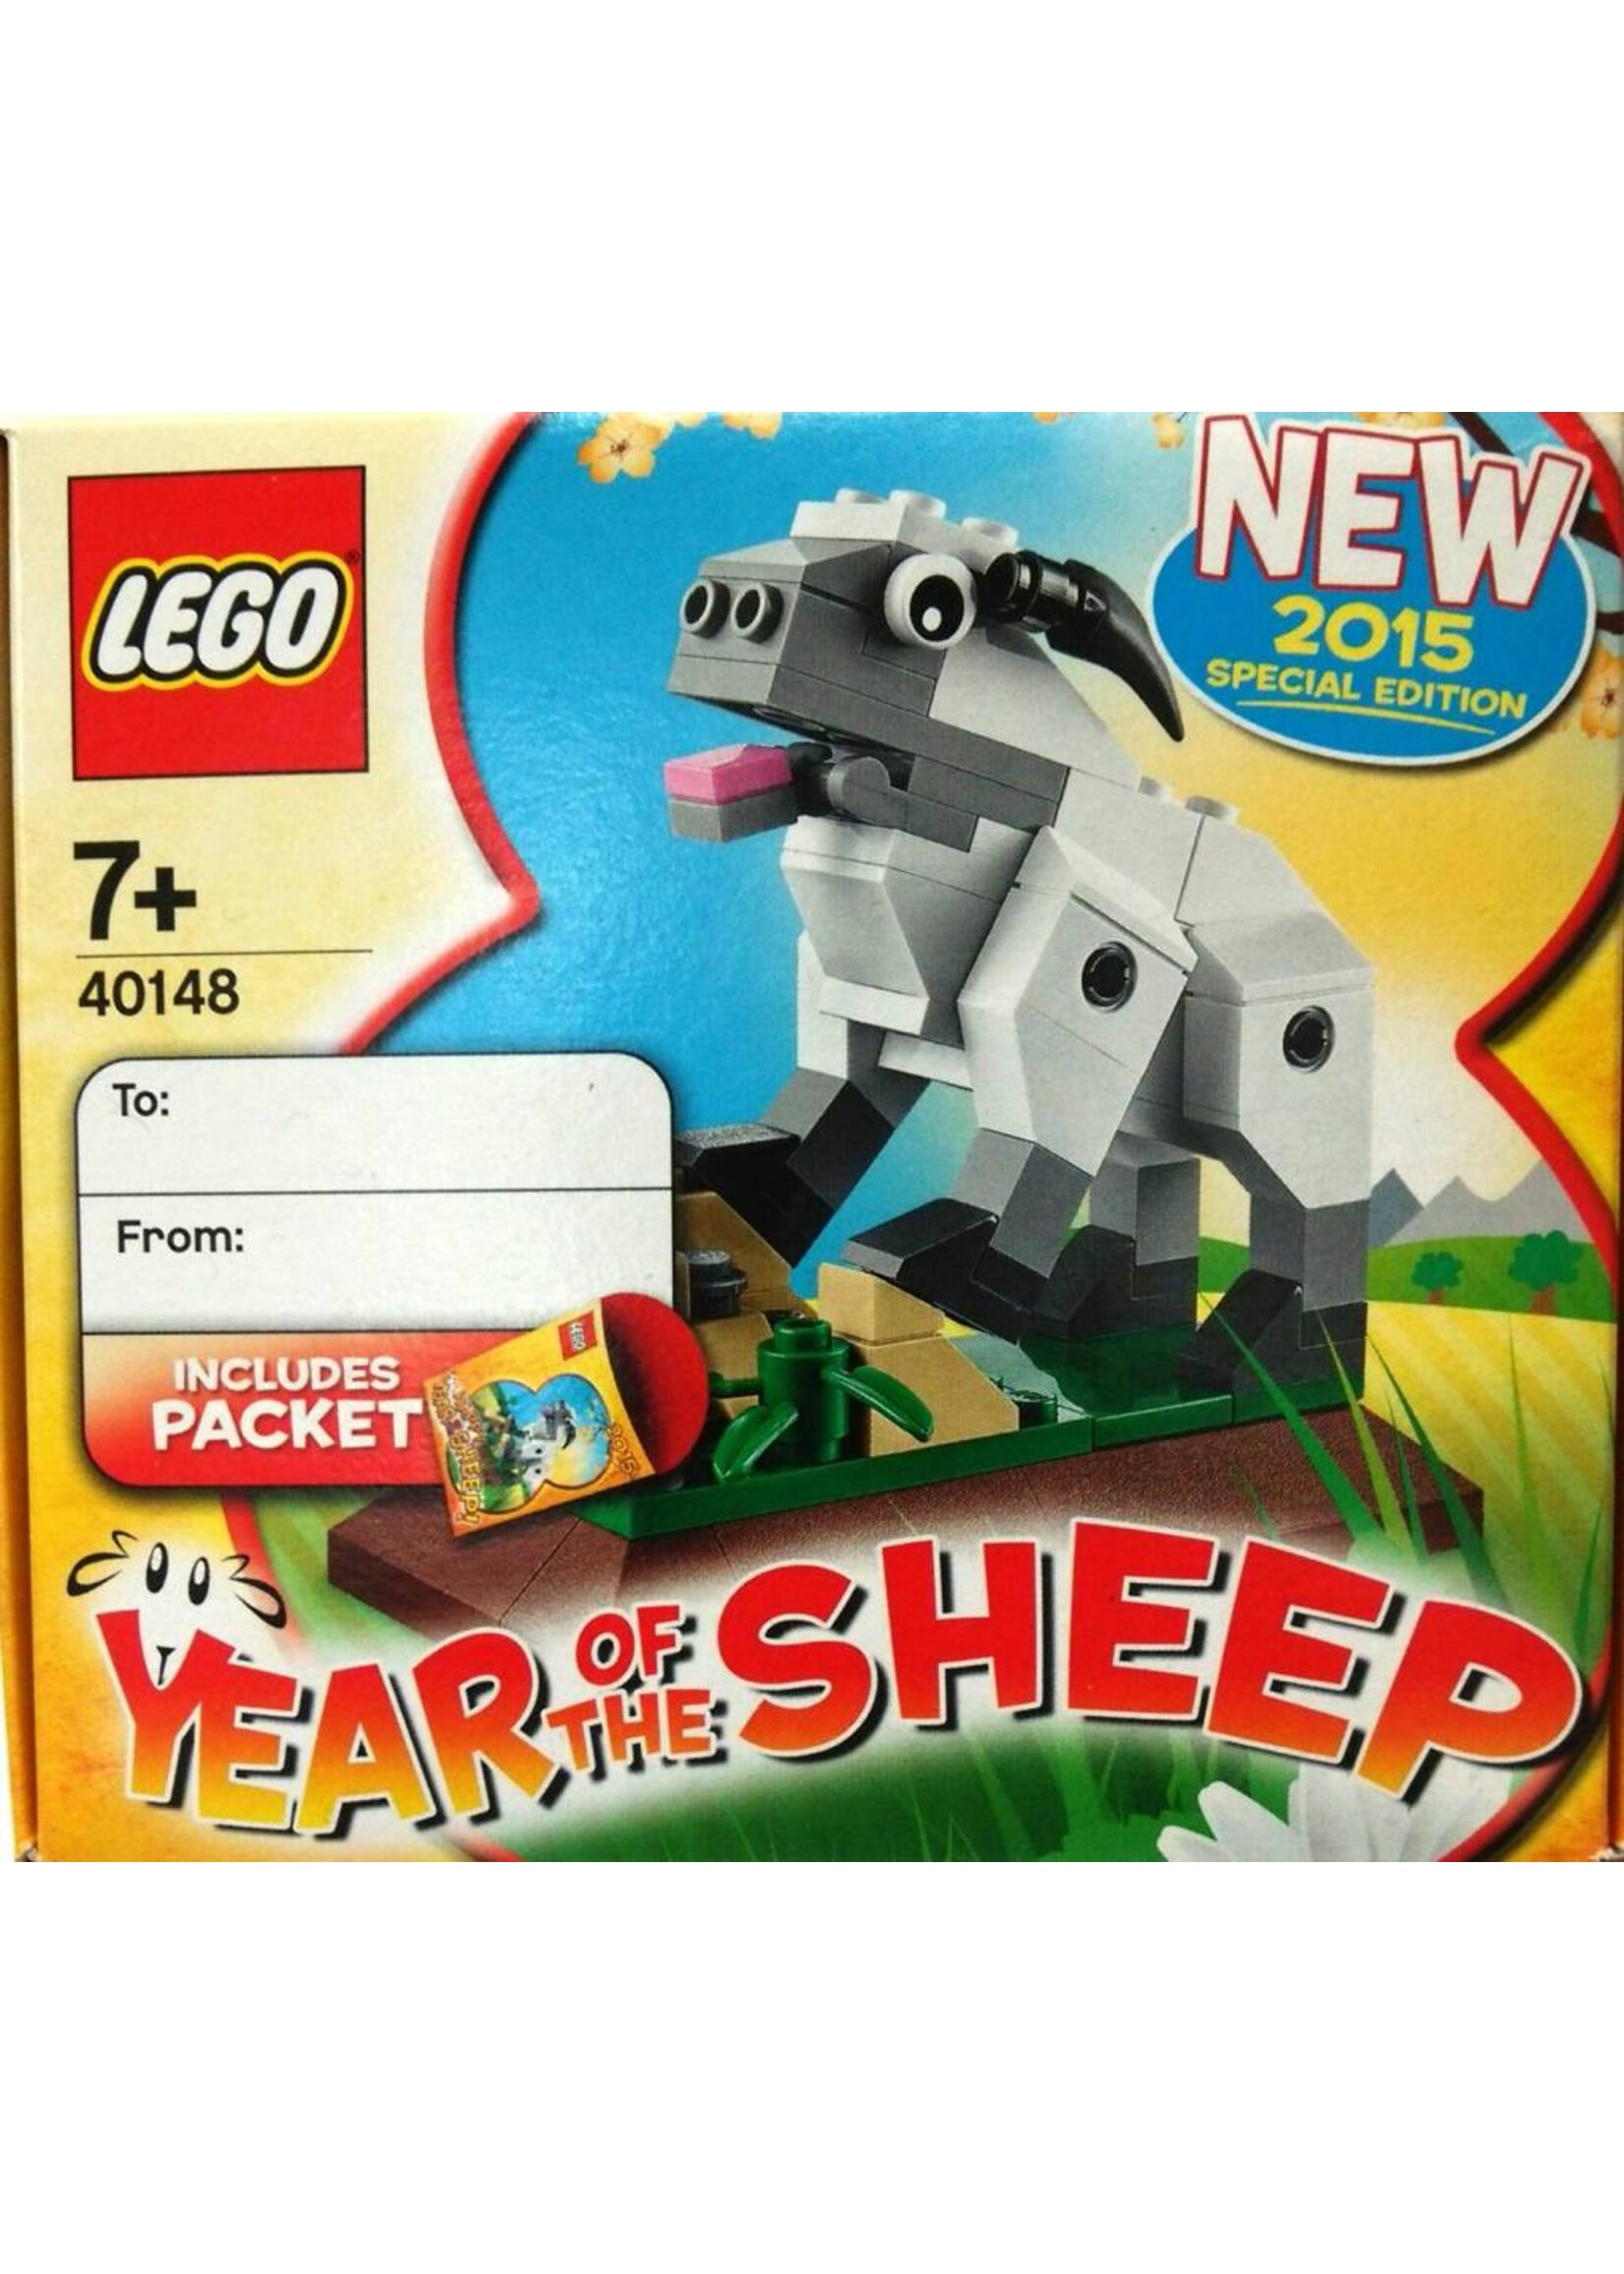 Lego 40148 Year of the Sheep